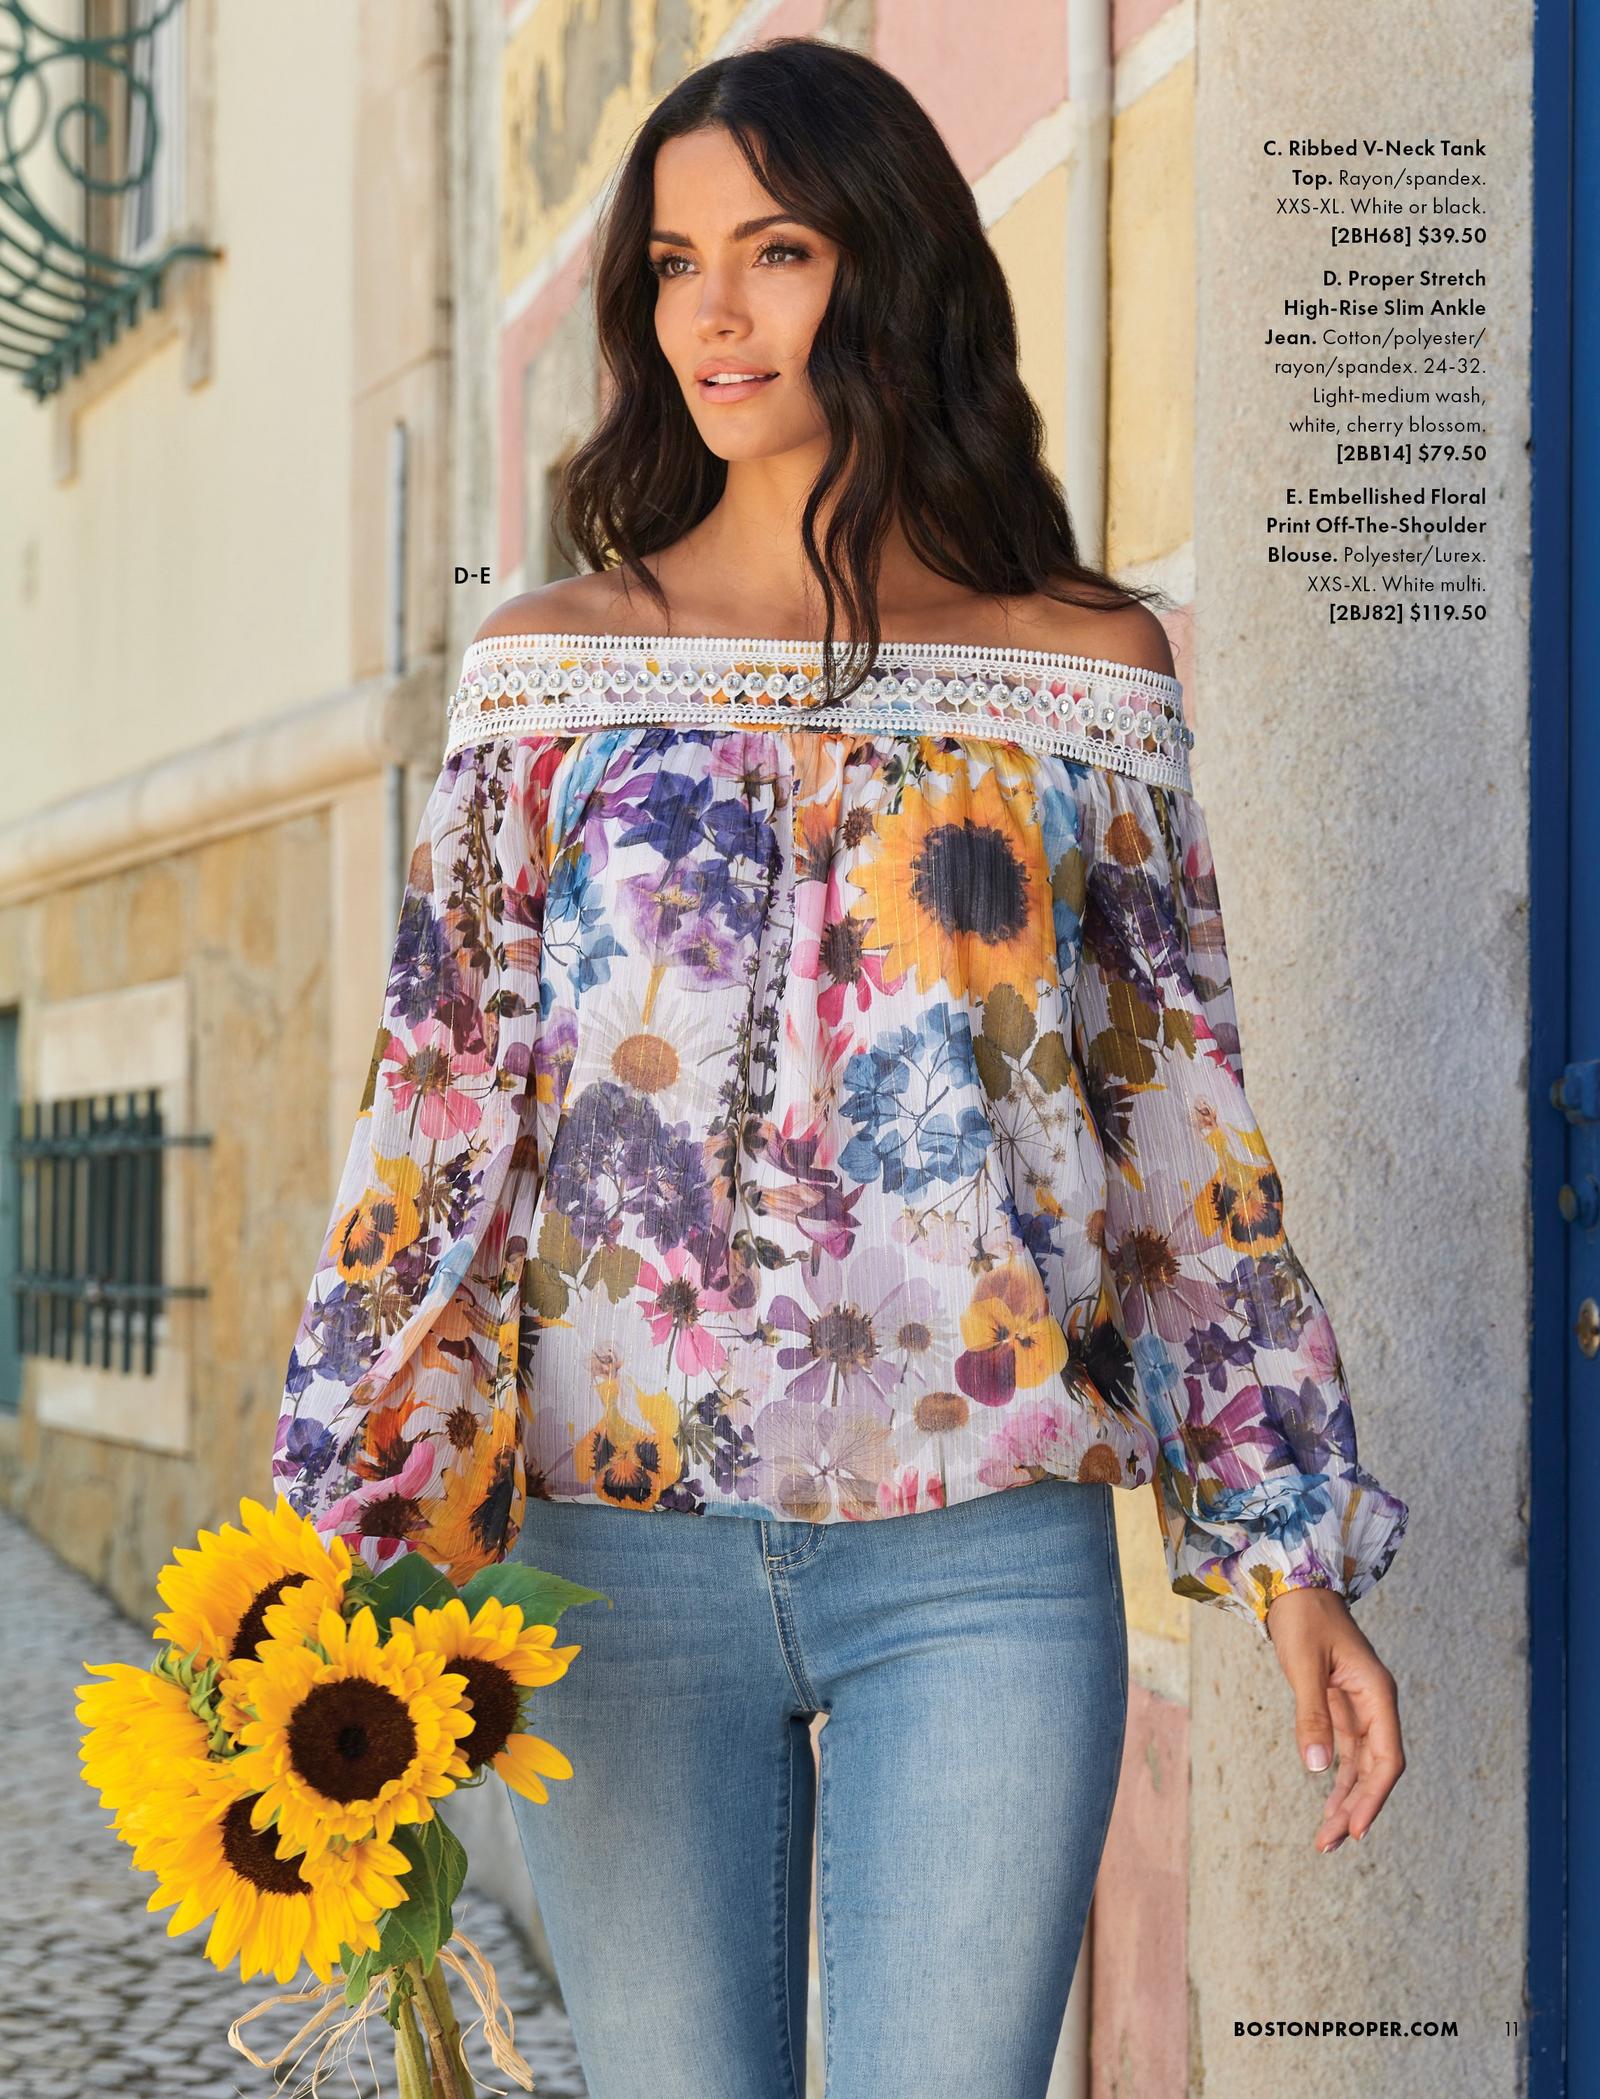 model wearing an off-the-shoulder lace floral print top and light wash jeans.